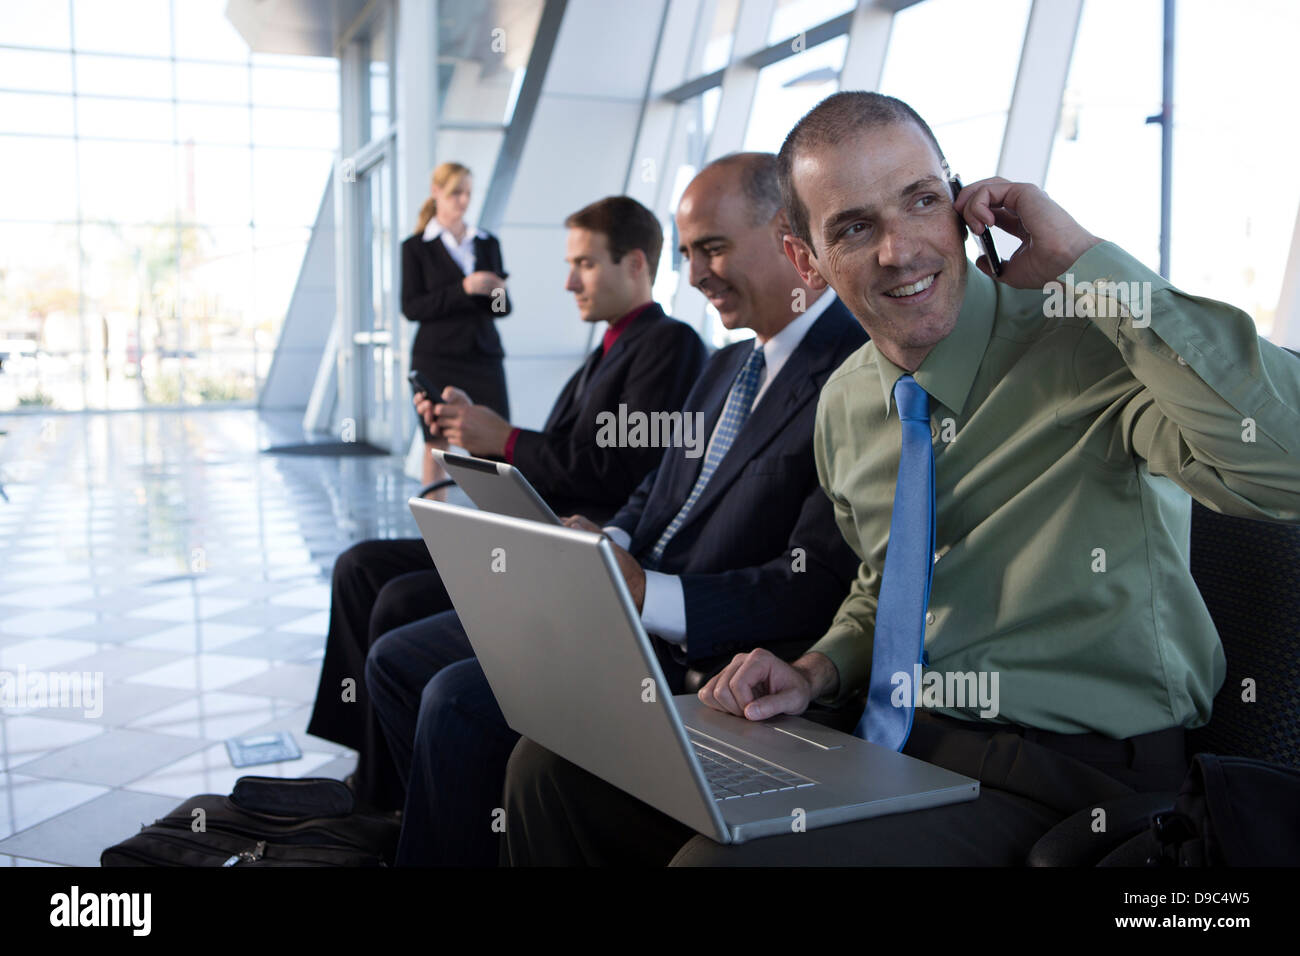 Businessman on cell phone using laptop Stock Photo